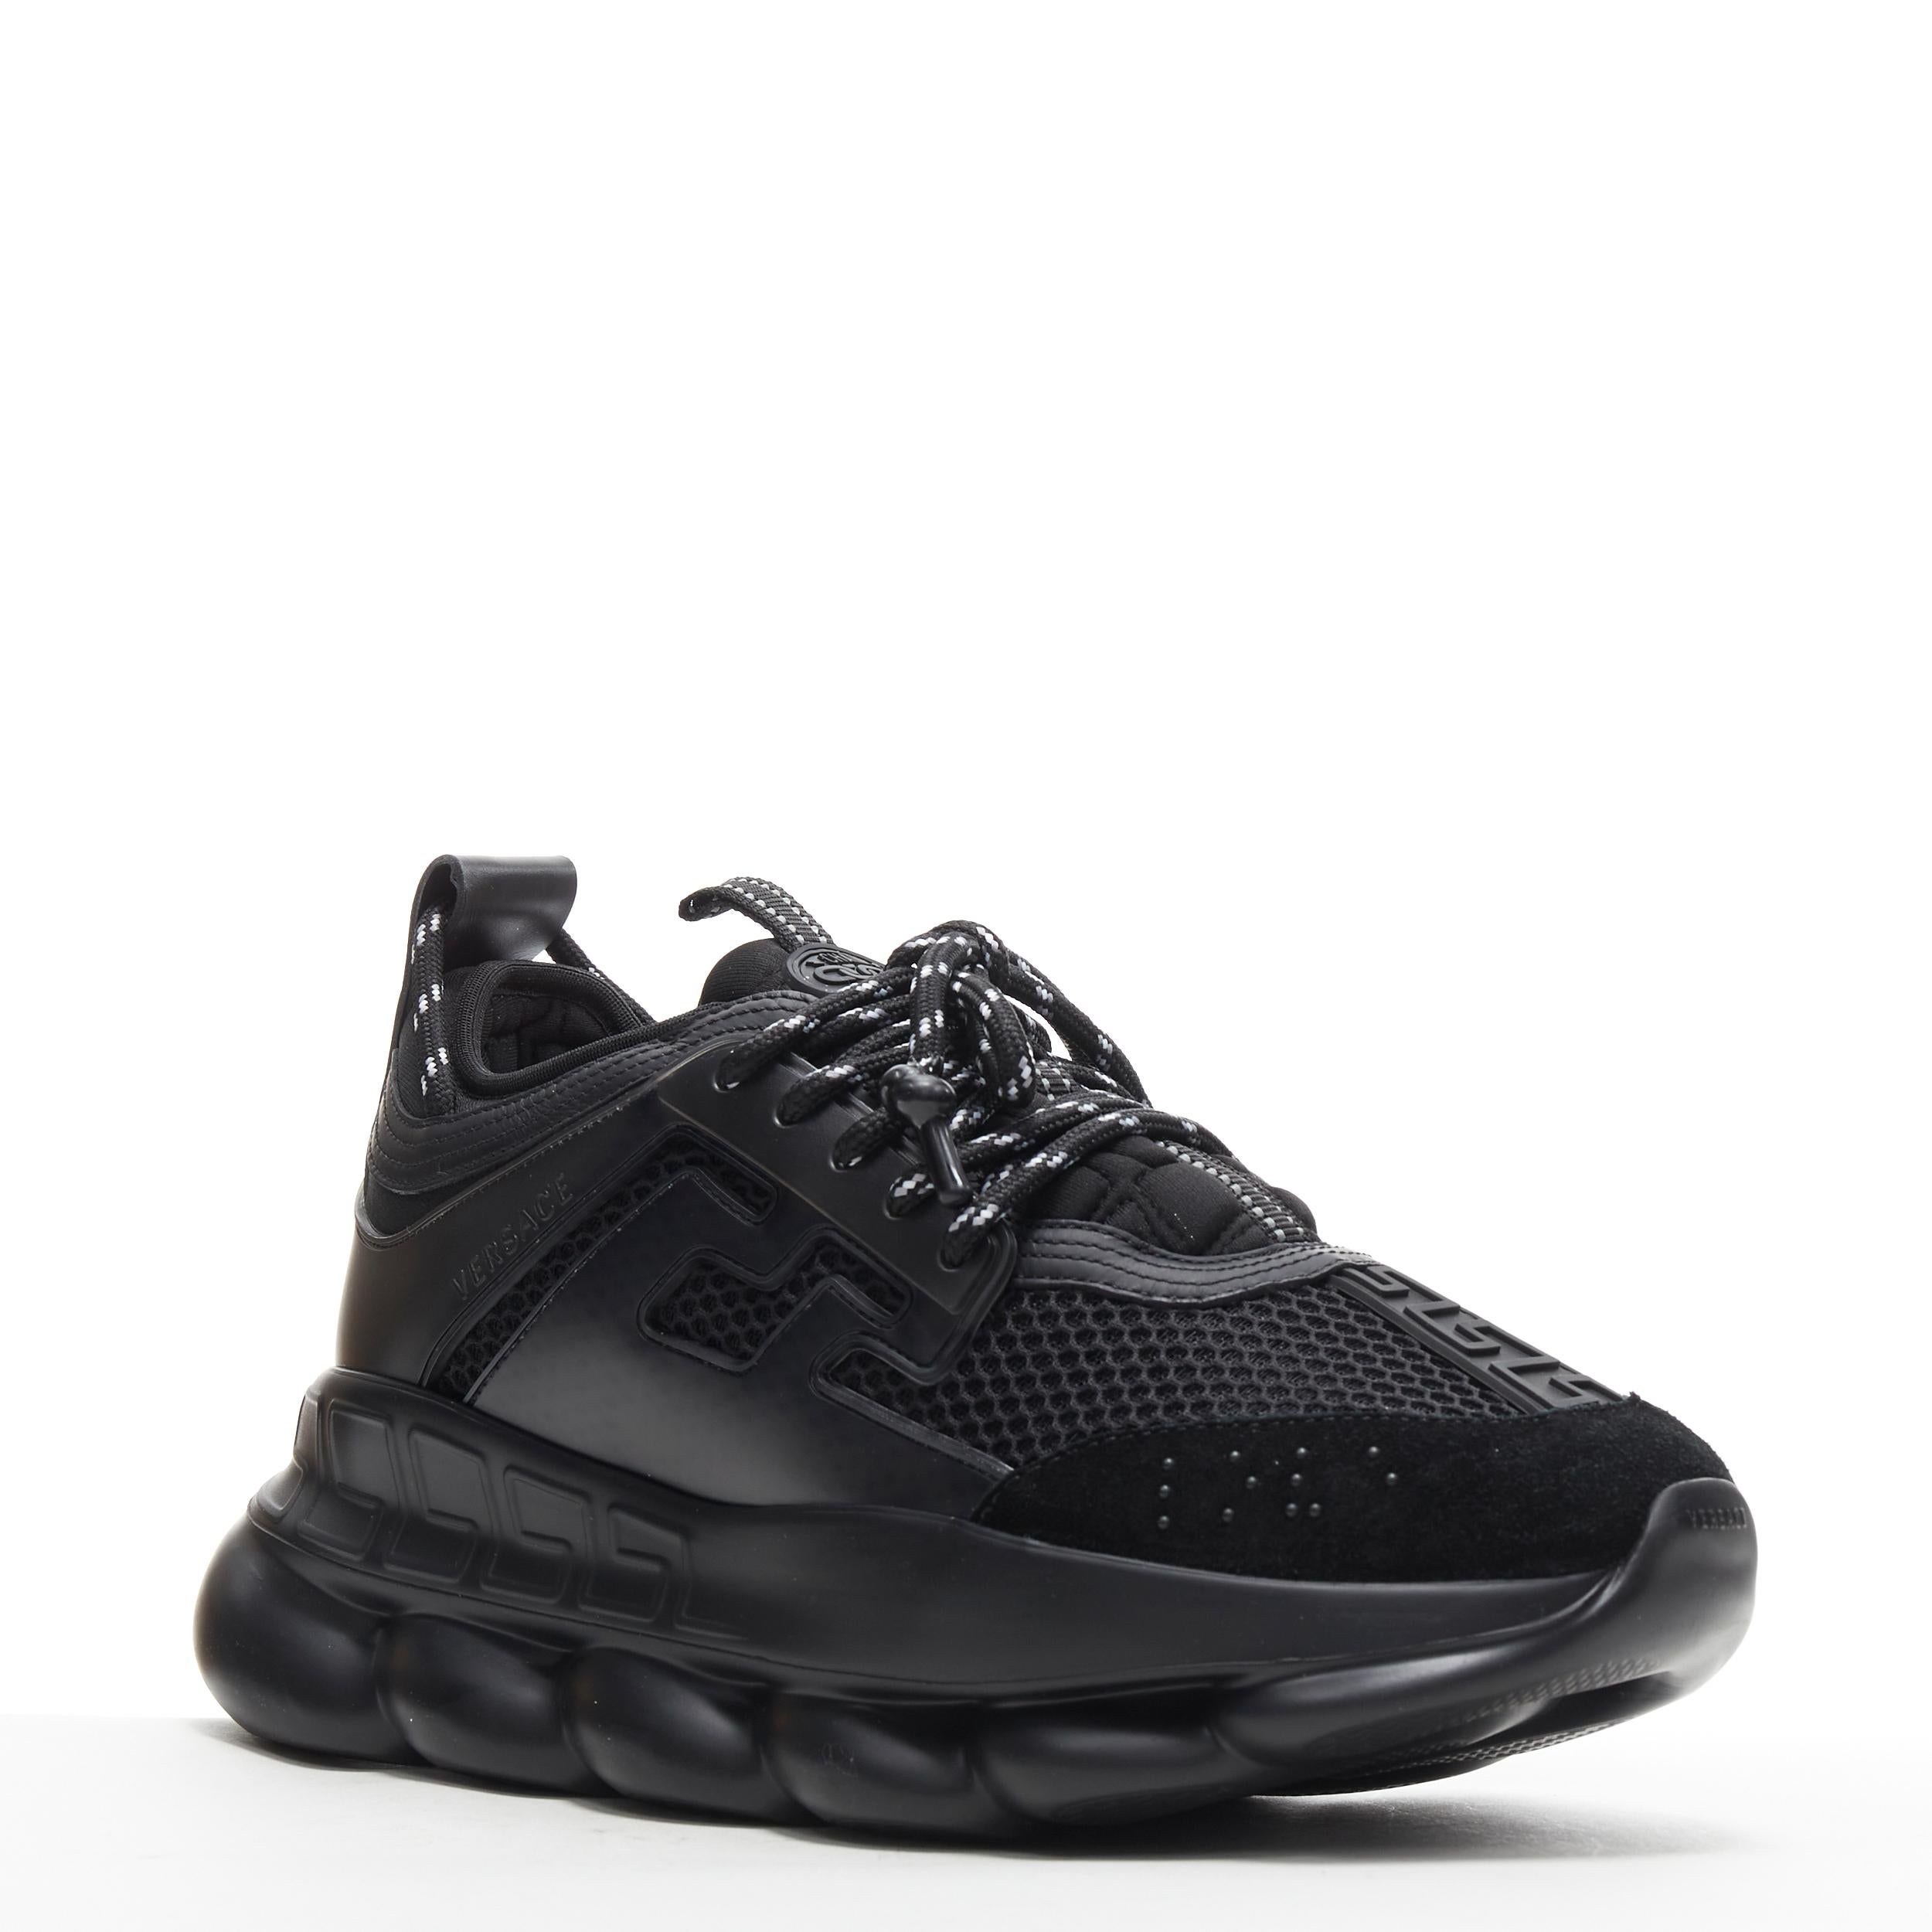 new VERSACE Chain Reaction Triple Black Nero low chunky sole sneaker EU40 US7 Reference: TGAS/B00776 
Brand: Versace 
Designer: Salehe Bembury 
Model: Chain Reaction Triple Black 
Material: Leather 
Color: Black 
Pattern: Solid 
Closure: Lace up